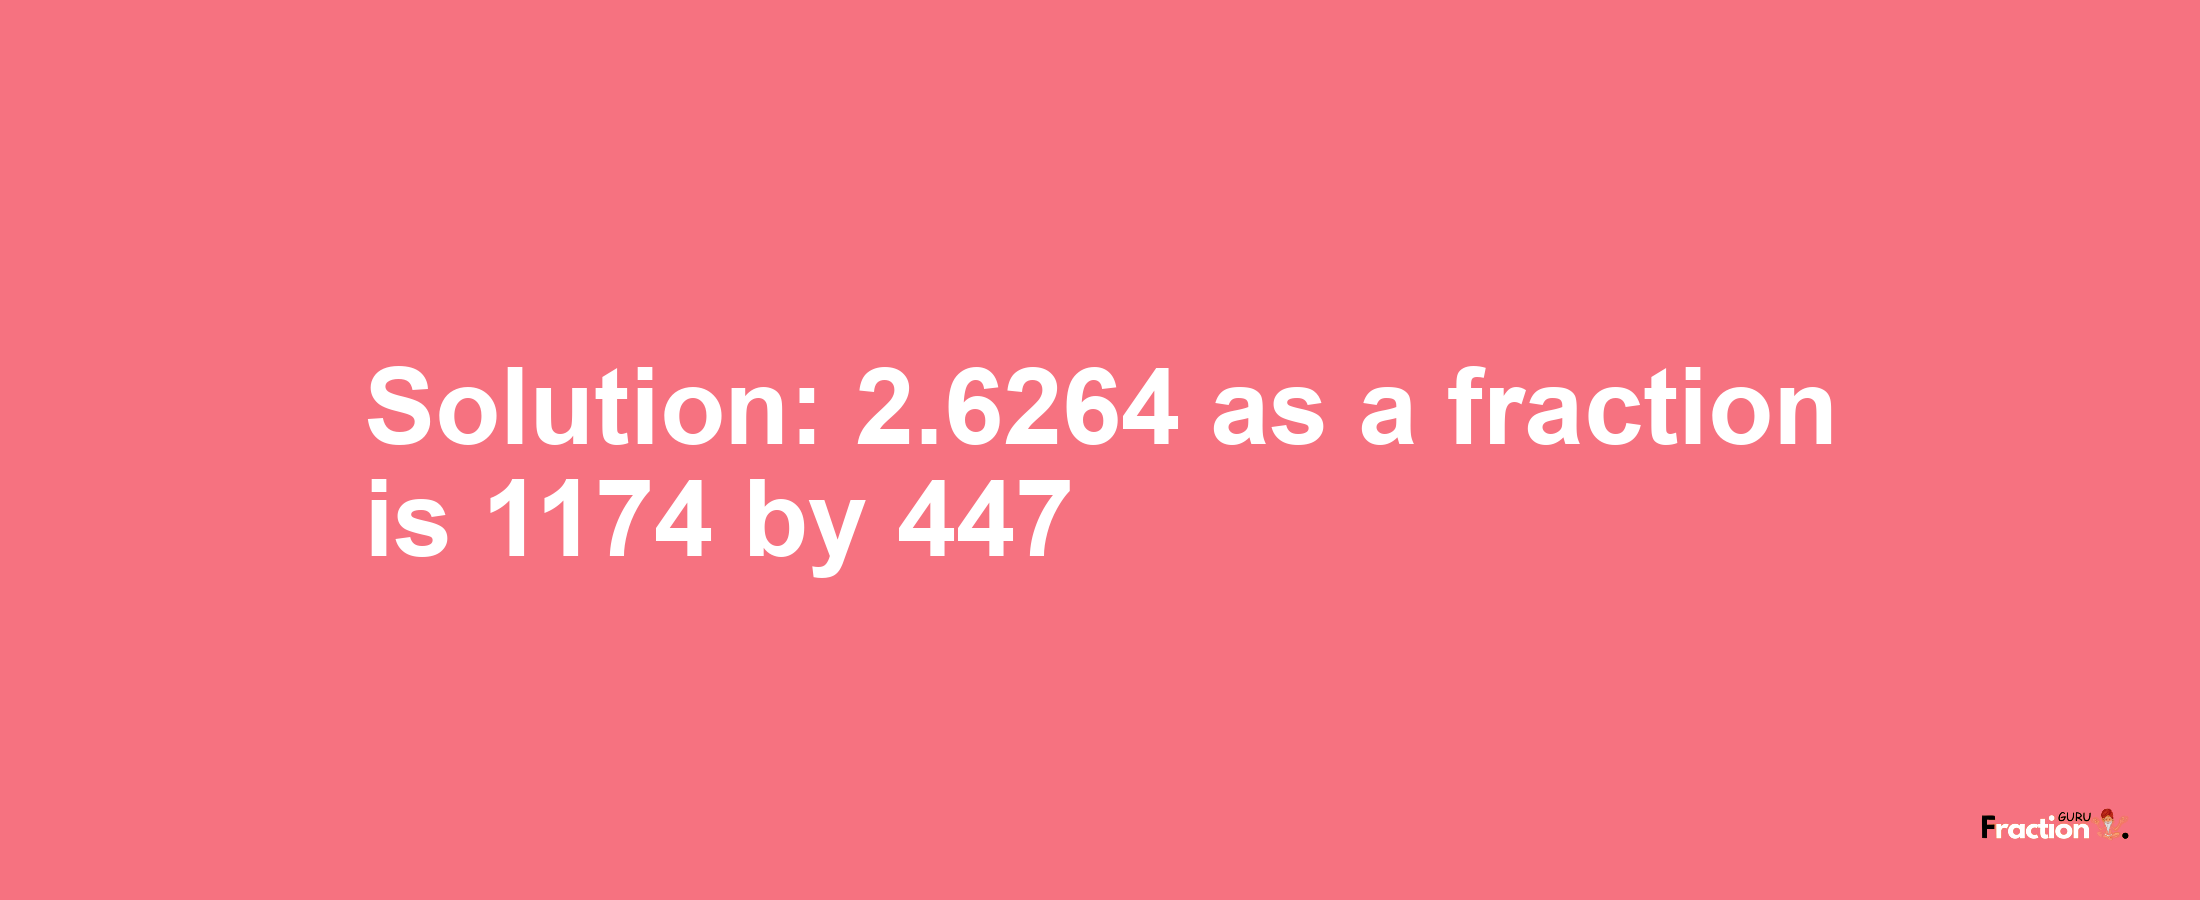 Solution:2.6264 as a fraction is 1174/447